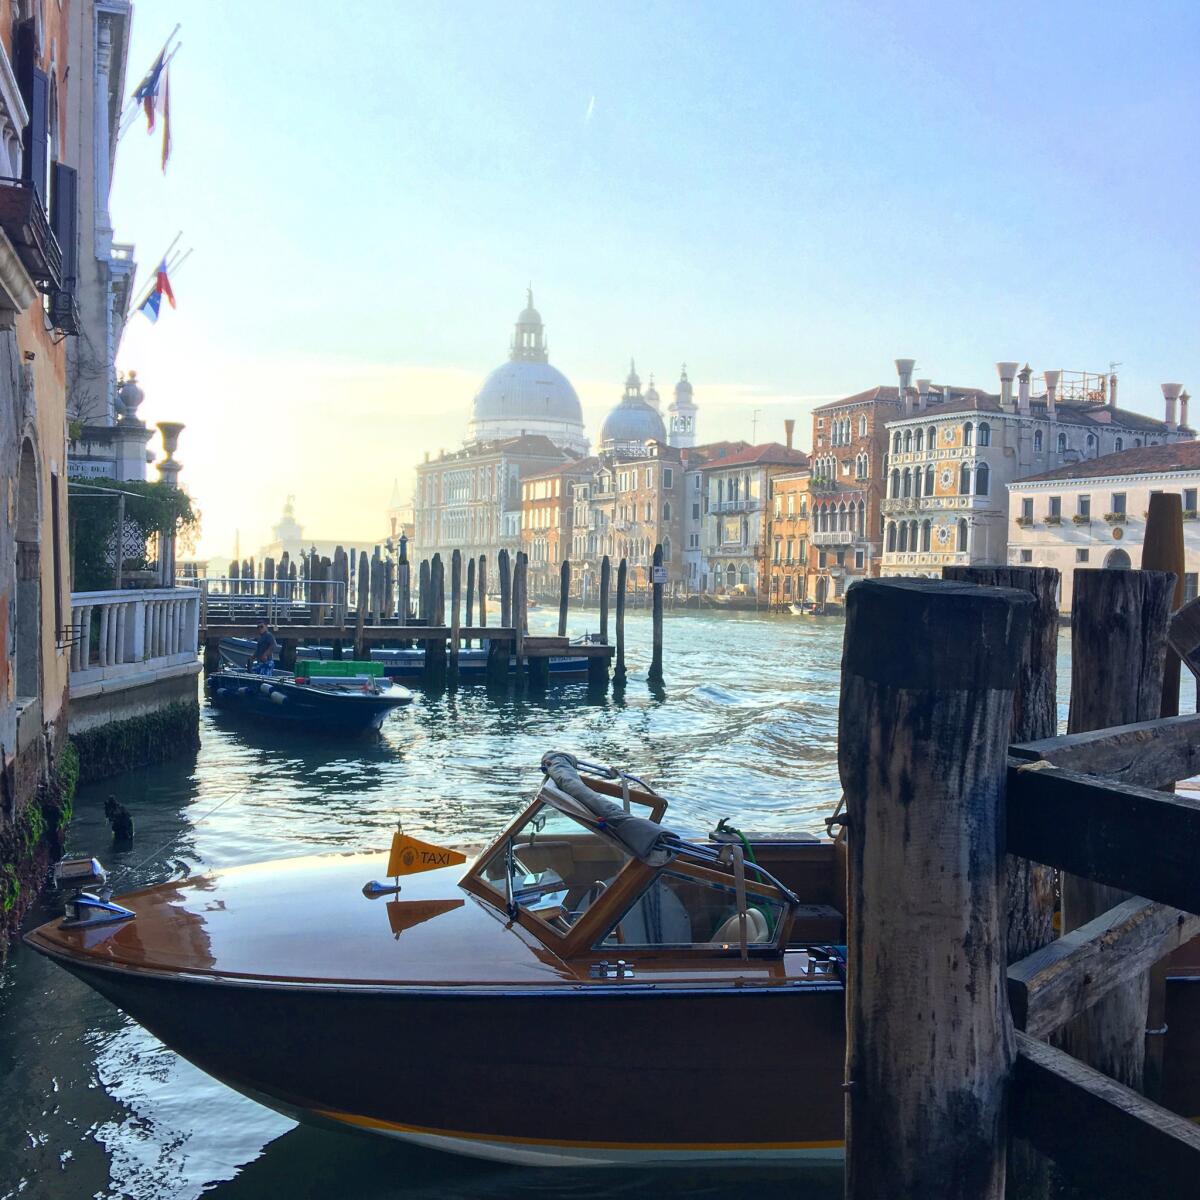 Venice, Italy | Zac Reeder, Agoura HillsReeder and his family in July were waiting for a water taxi to the airport when this view of Venice appeared. He grabbed it with his iPhone 6 plus. The haze in the distance, he said, “gives it an old-time, painterly look to me.”